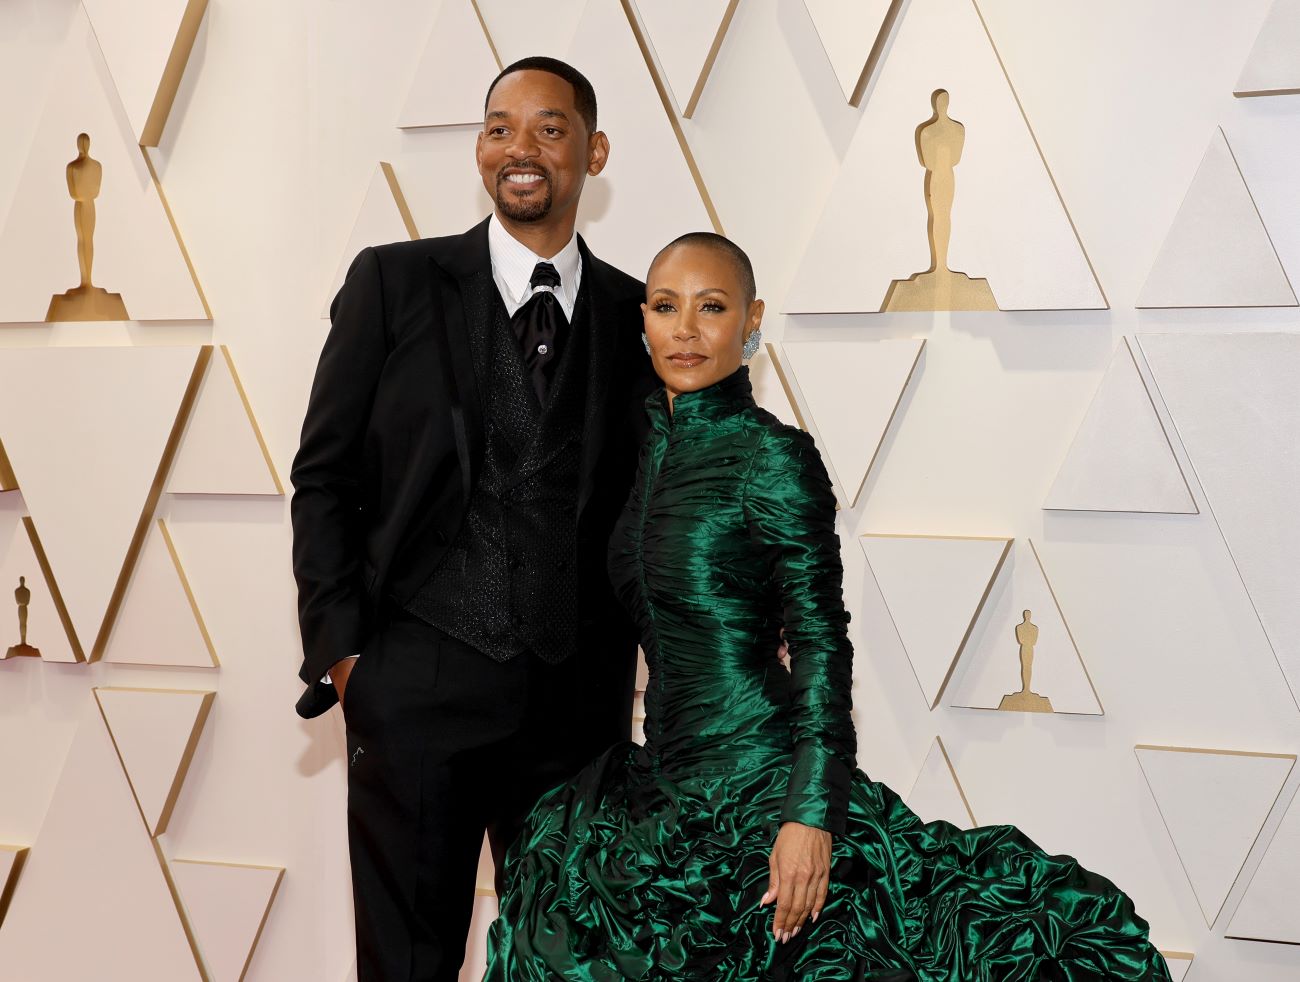 Will Smith wears a suit and Jada Pinkett Smith wears a green dress on the Oscars red carpet.